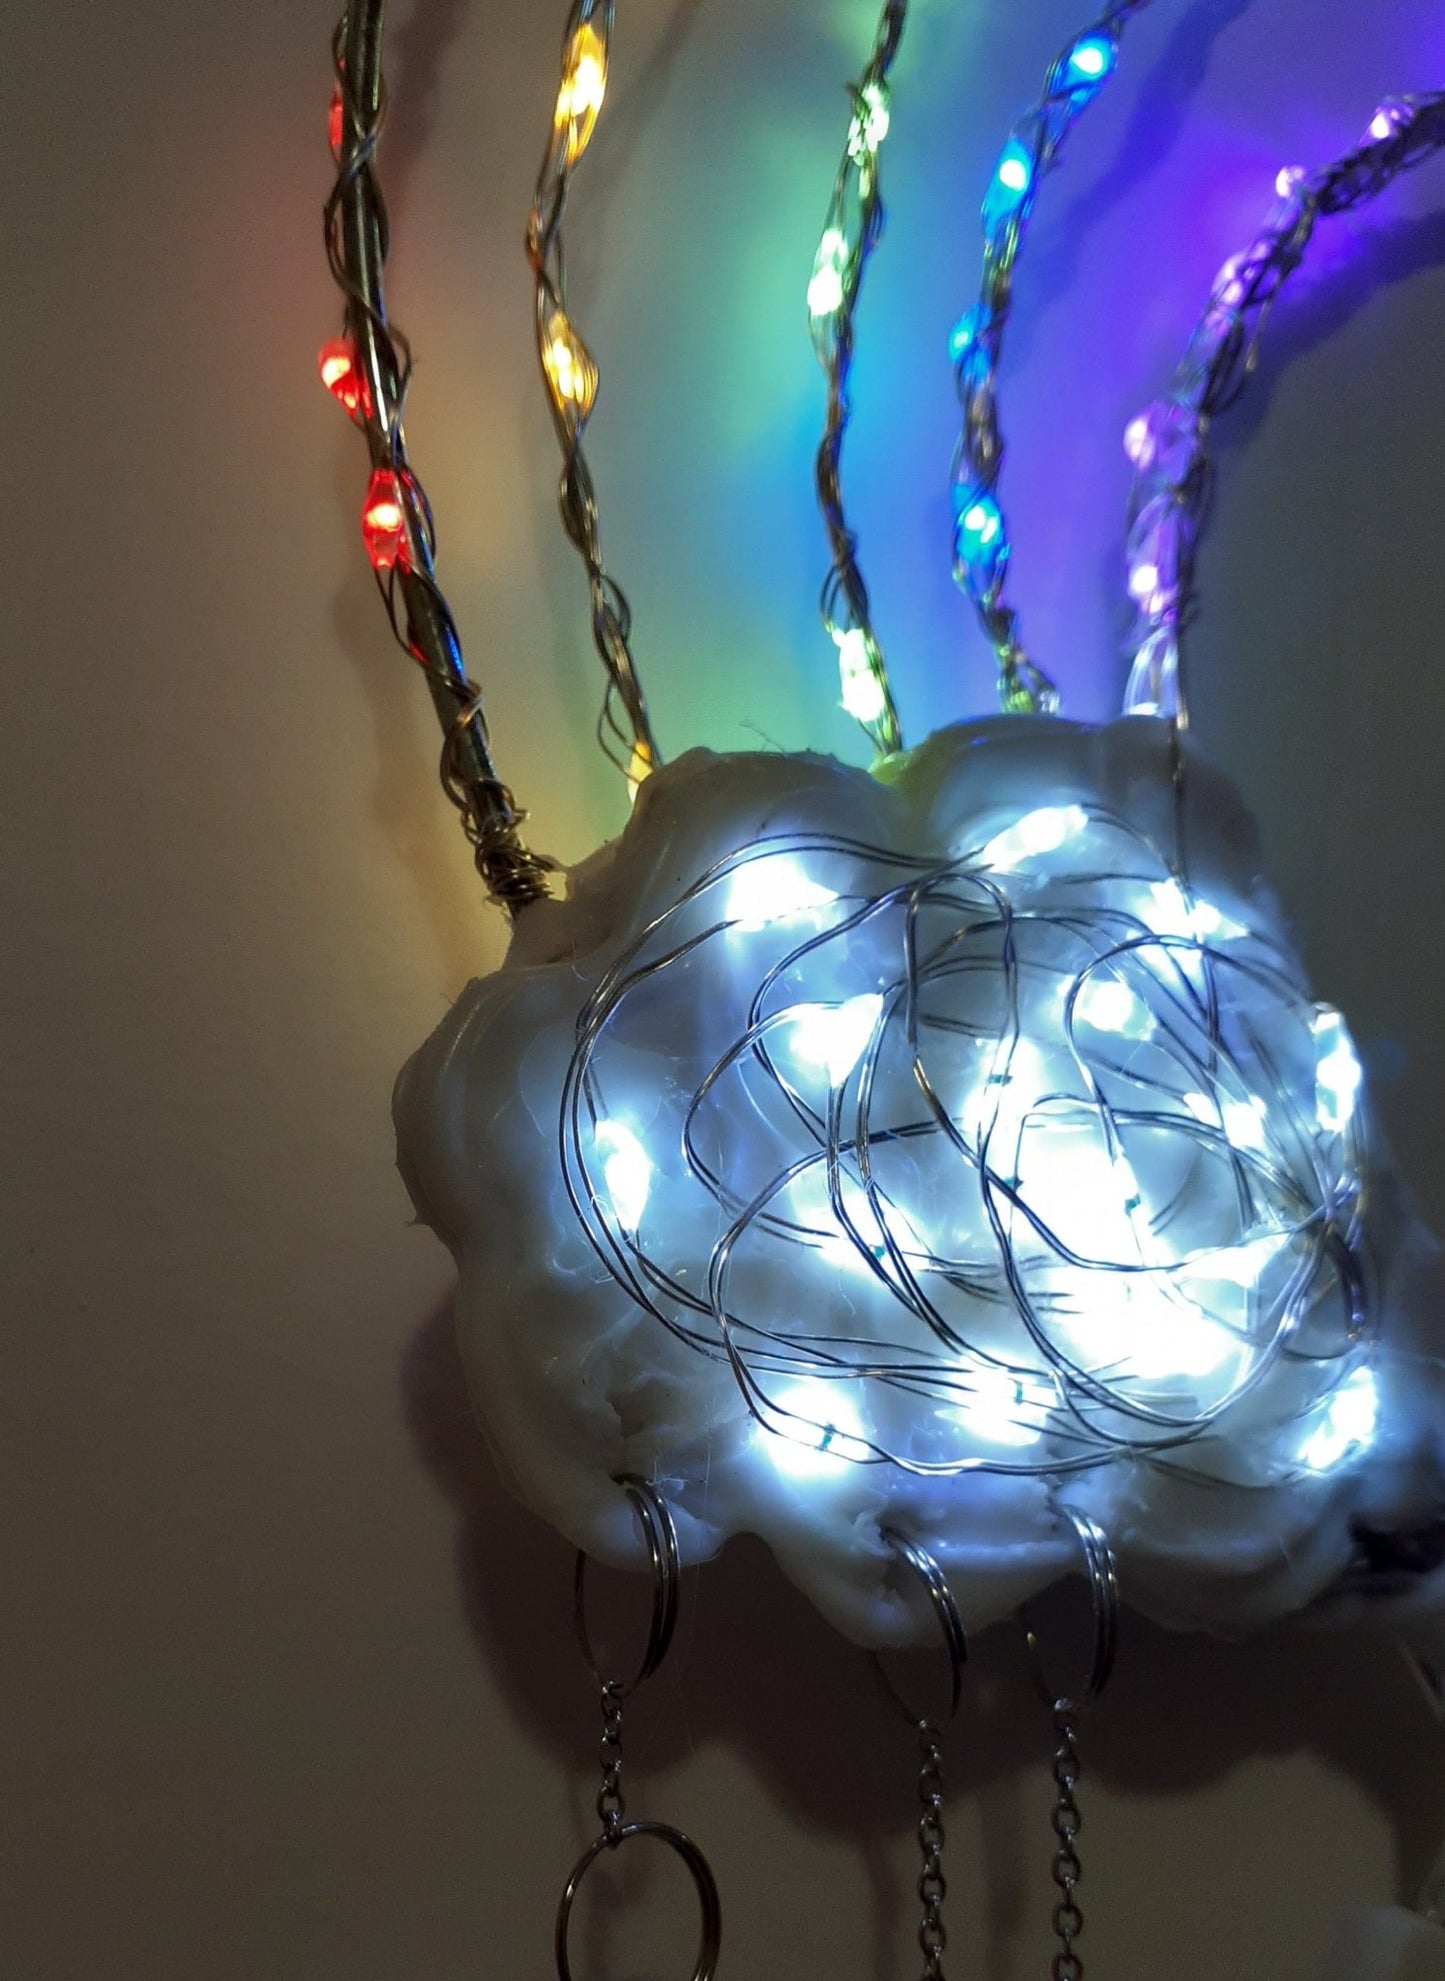 Glowing LED Rainbow Headpiece Crown with Clouds and Crystal Raindrops, Light Up - Experimental One-of-a-Kind Wearable Art - LumiFae